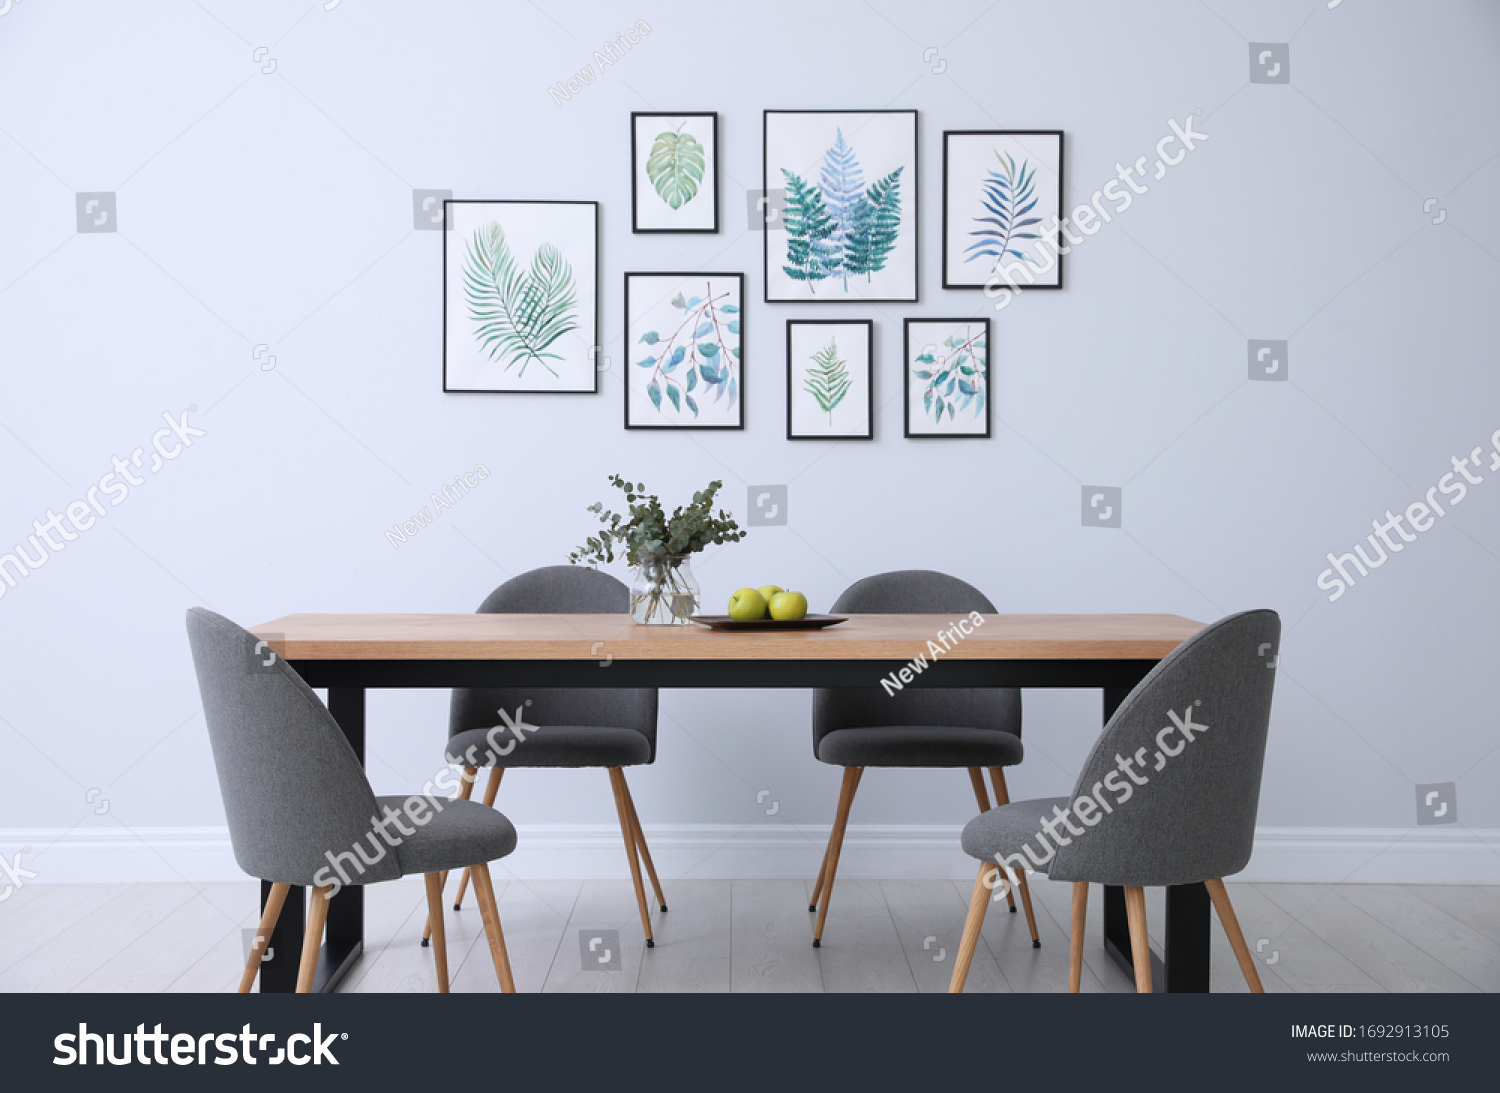 Stylish room interior with modern table, chairs and paintings of tropical leaves. Idea for design #1692913105